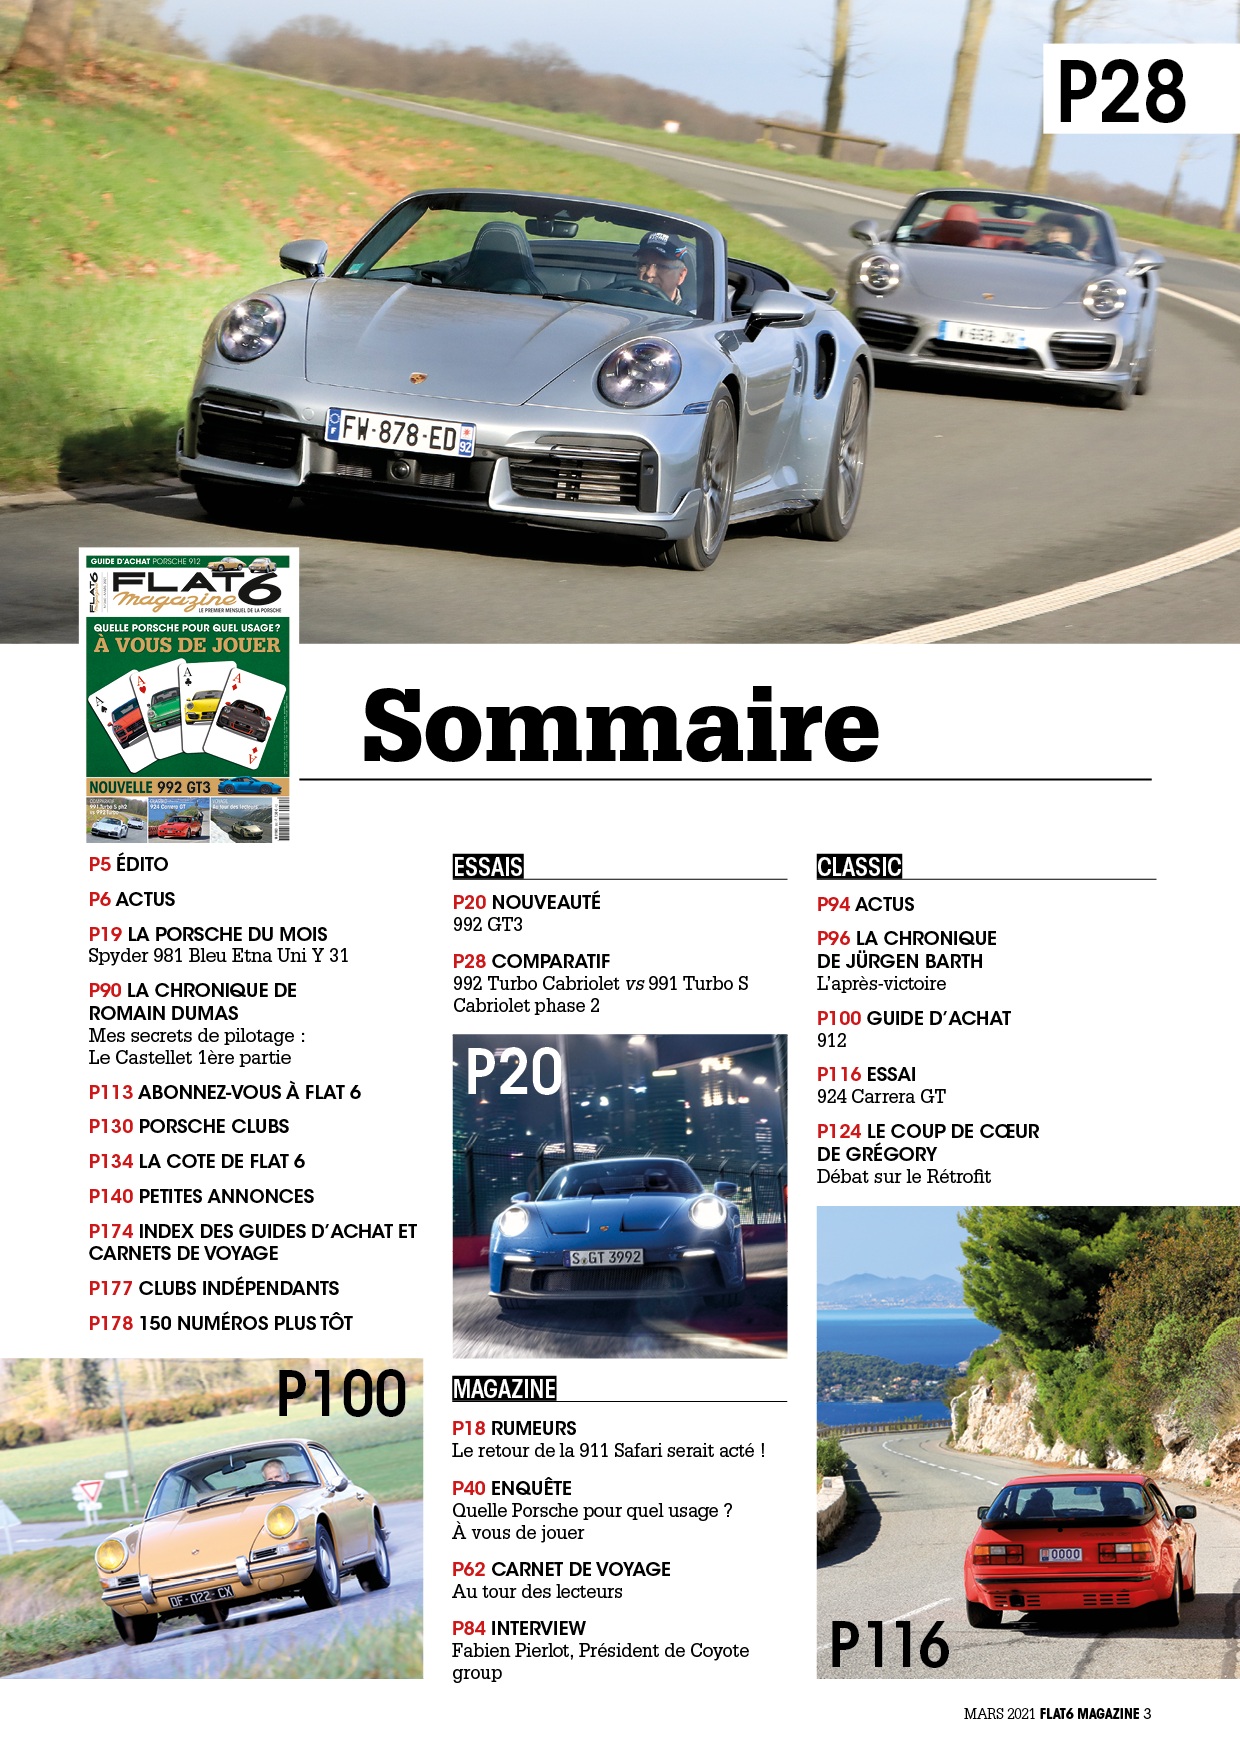 Sommaire360